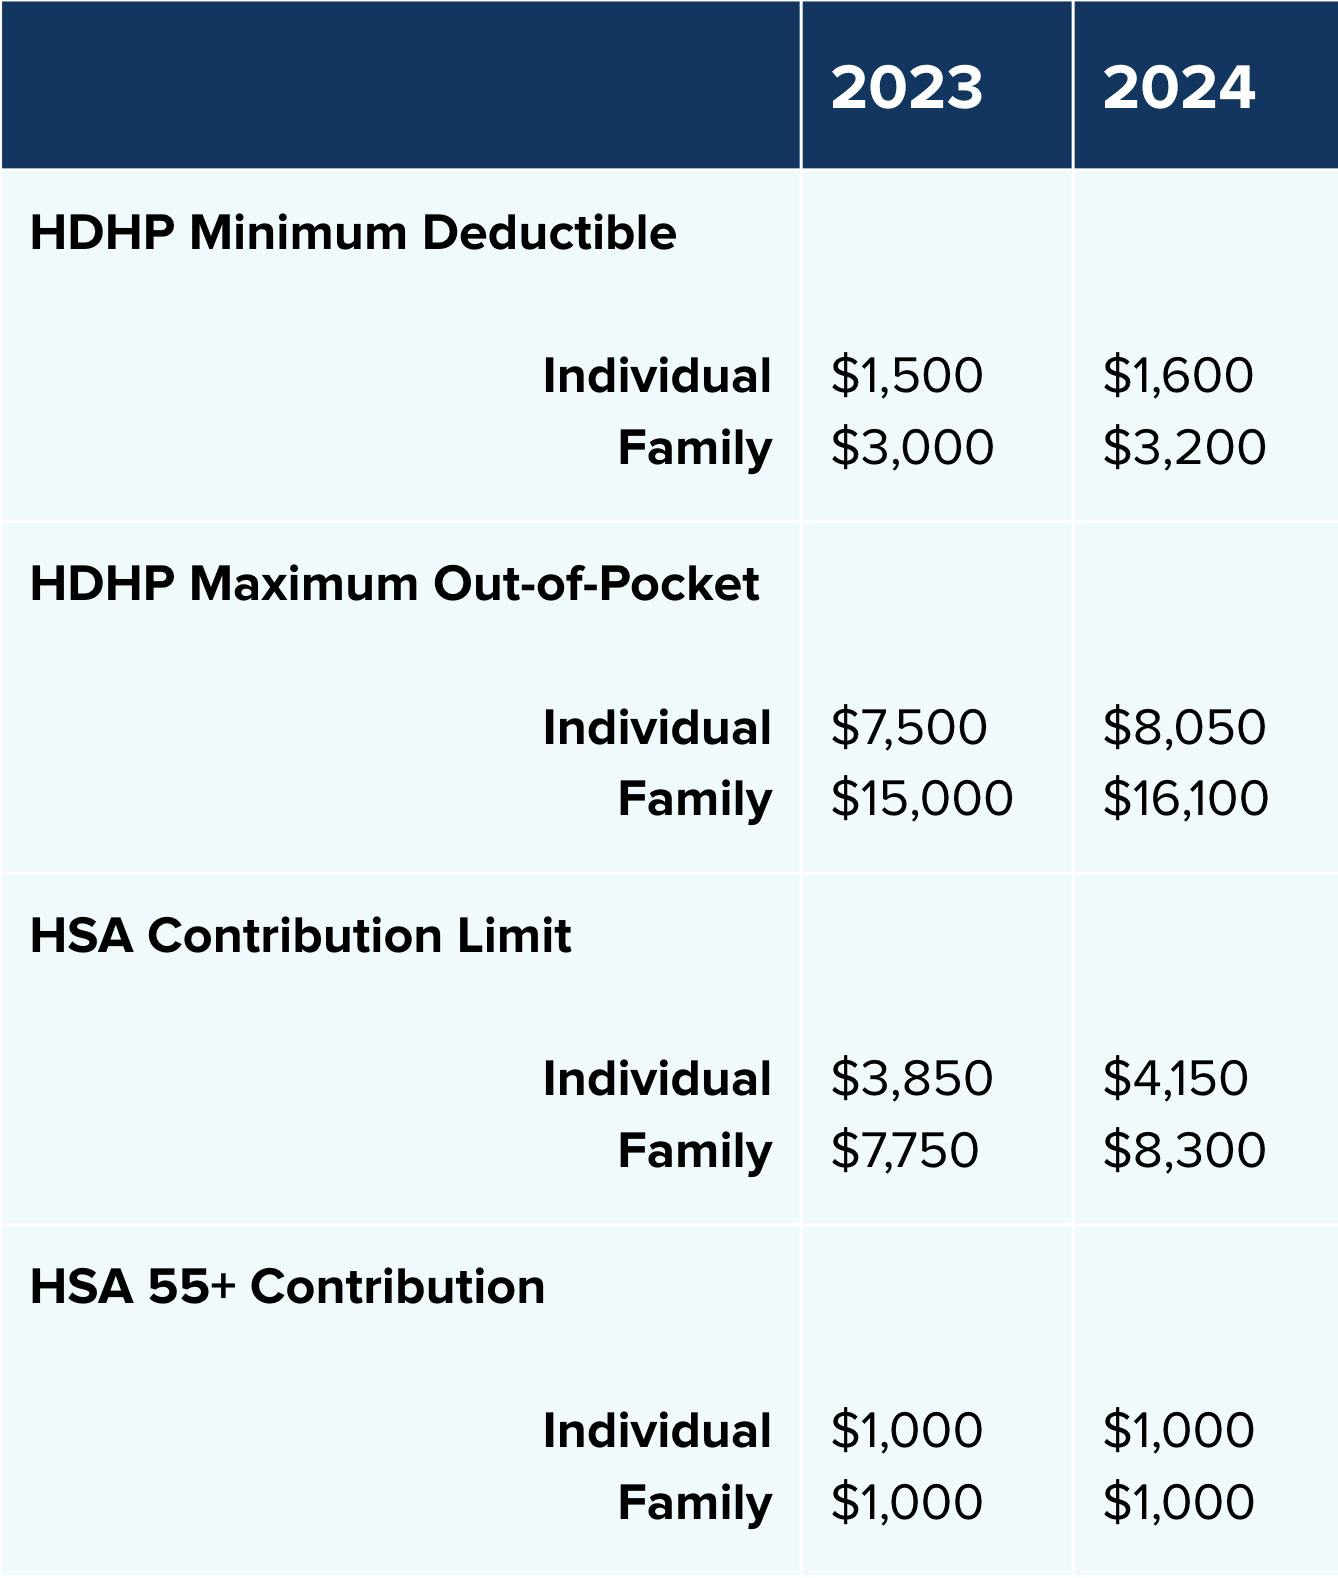 Hsa Contribution Limits For 2023 And 2024 Image to u